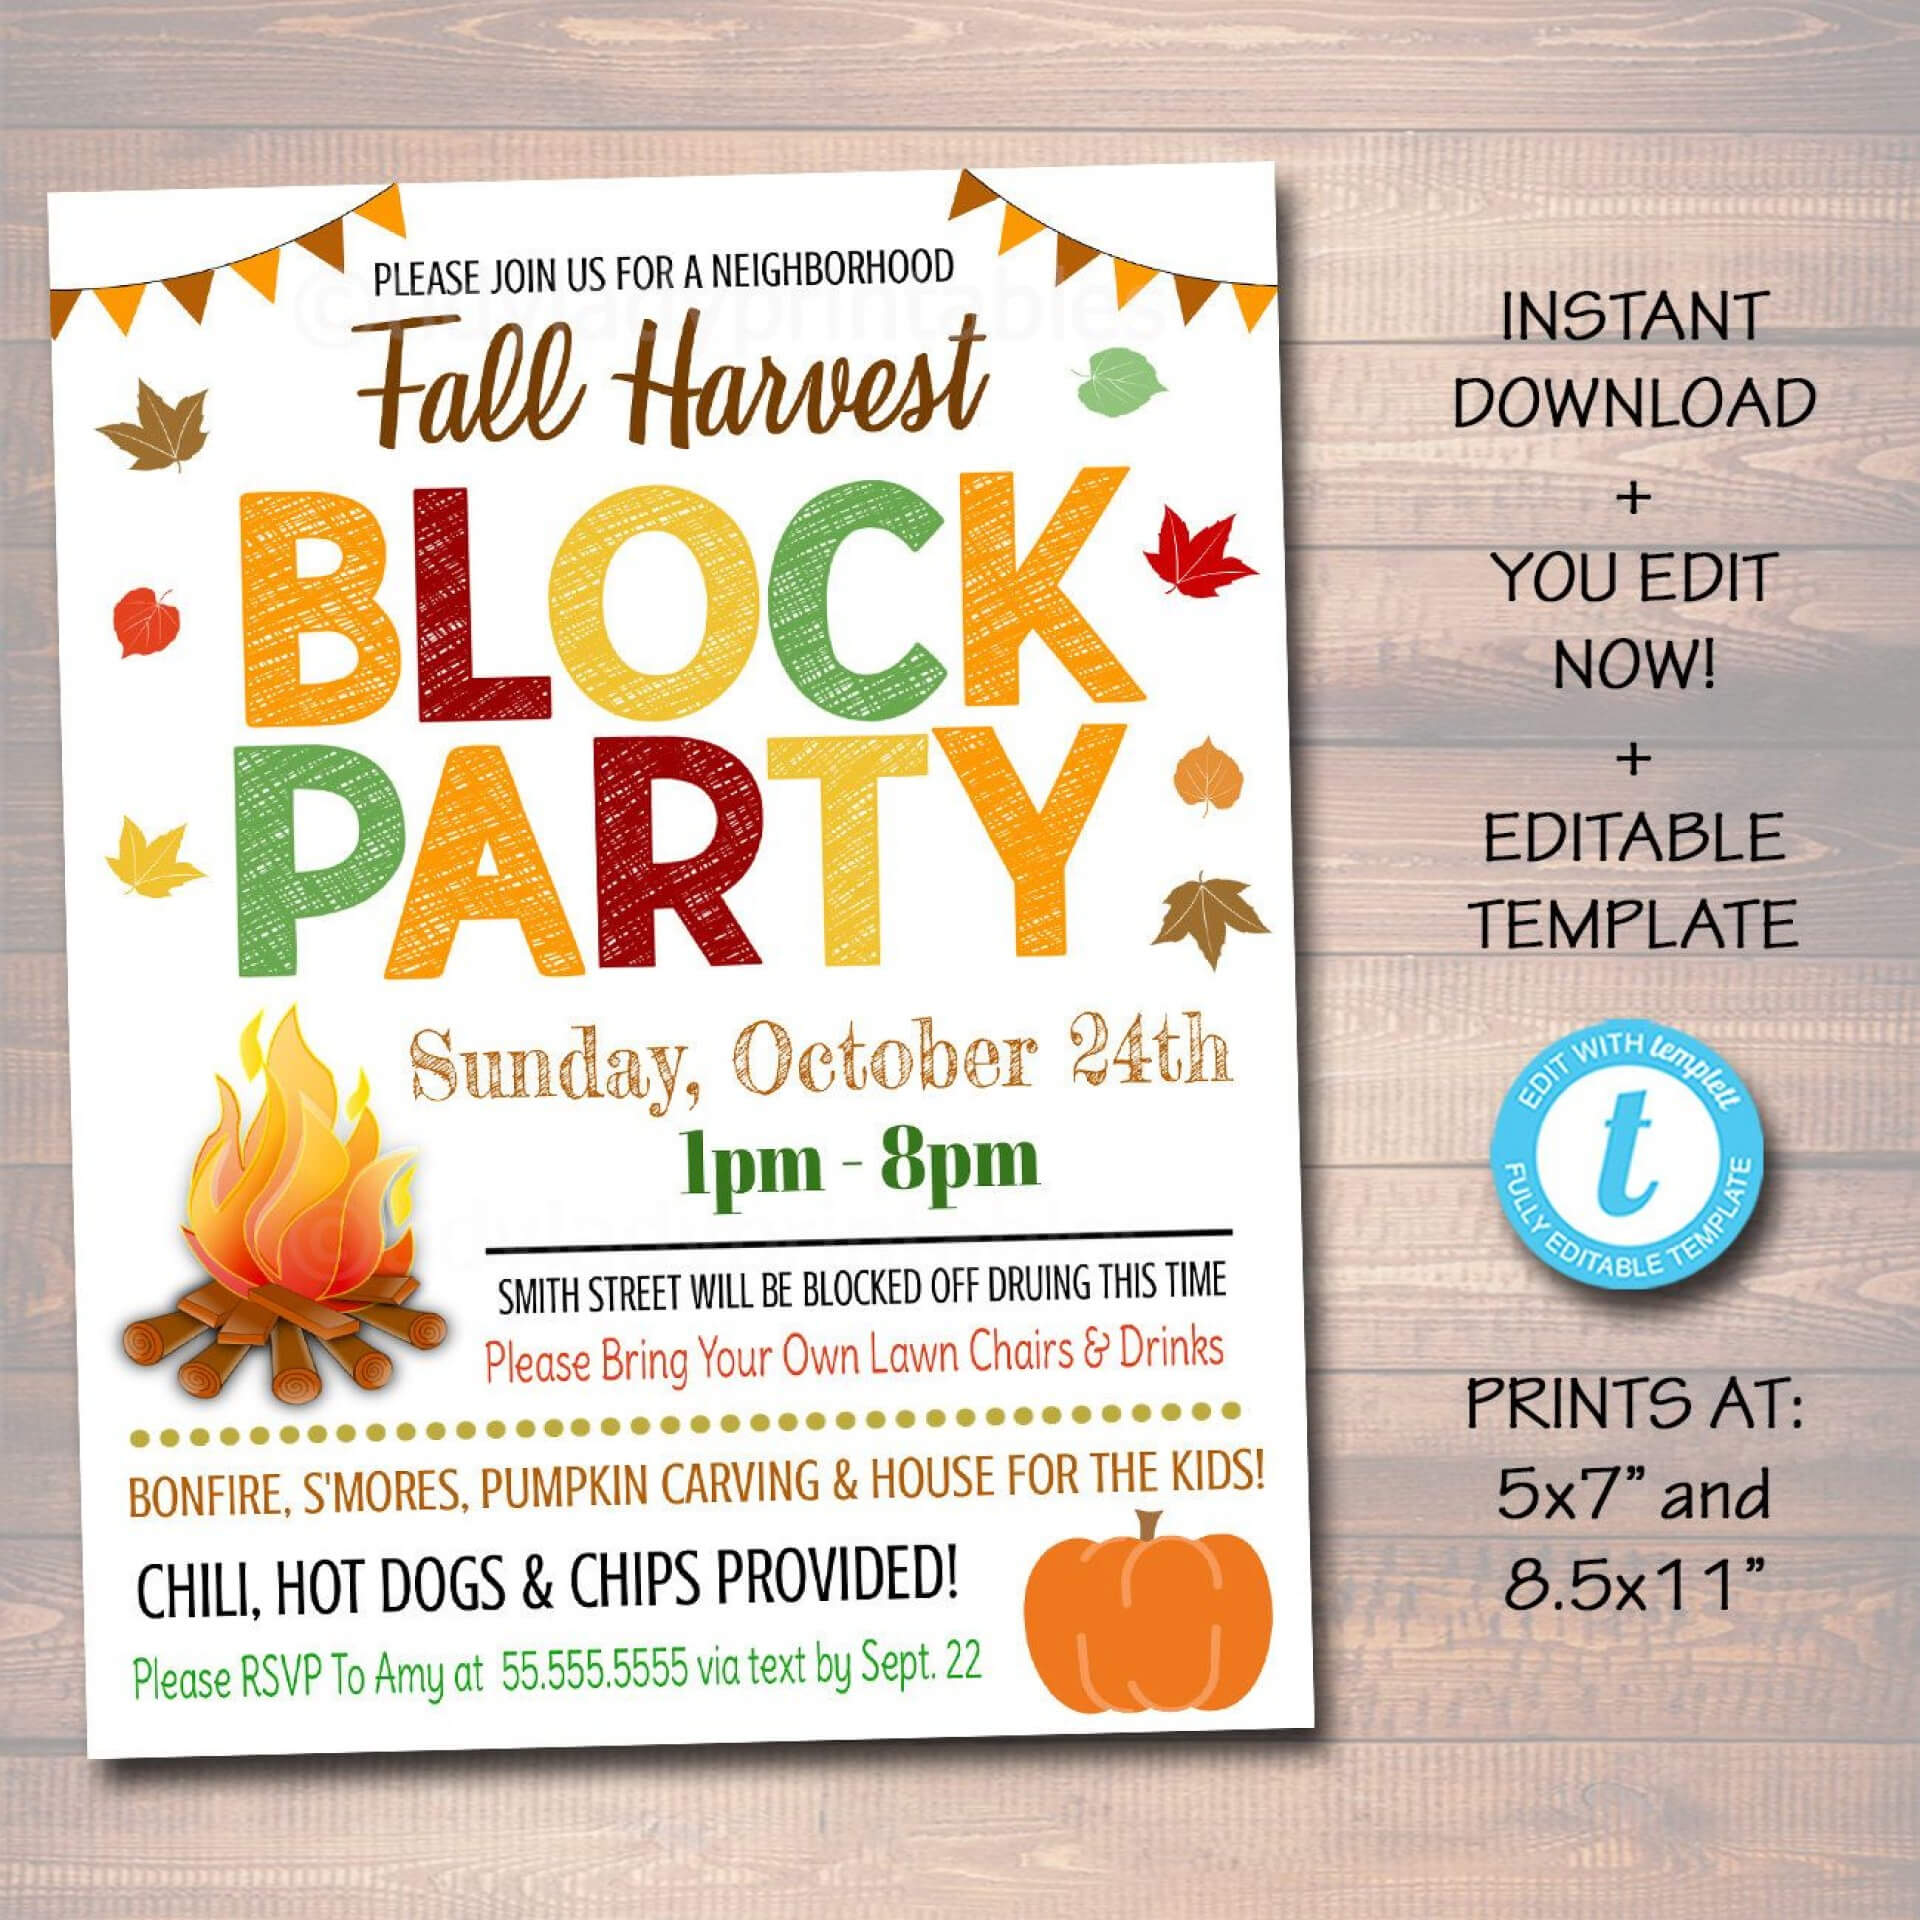 013 Block Party Flyer Templates Local College Template Flat1 With Regard To Block Party Flyer Template